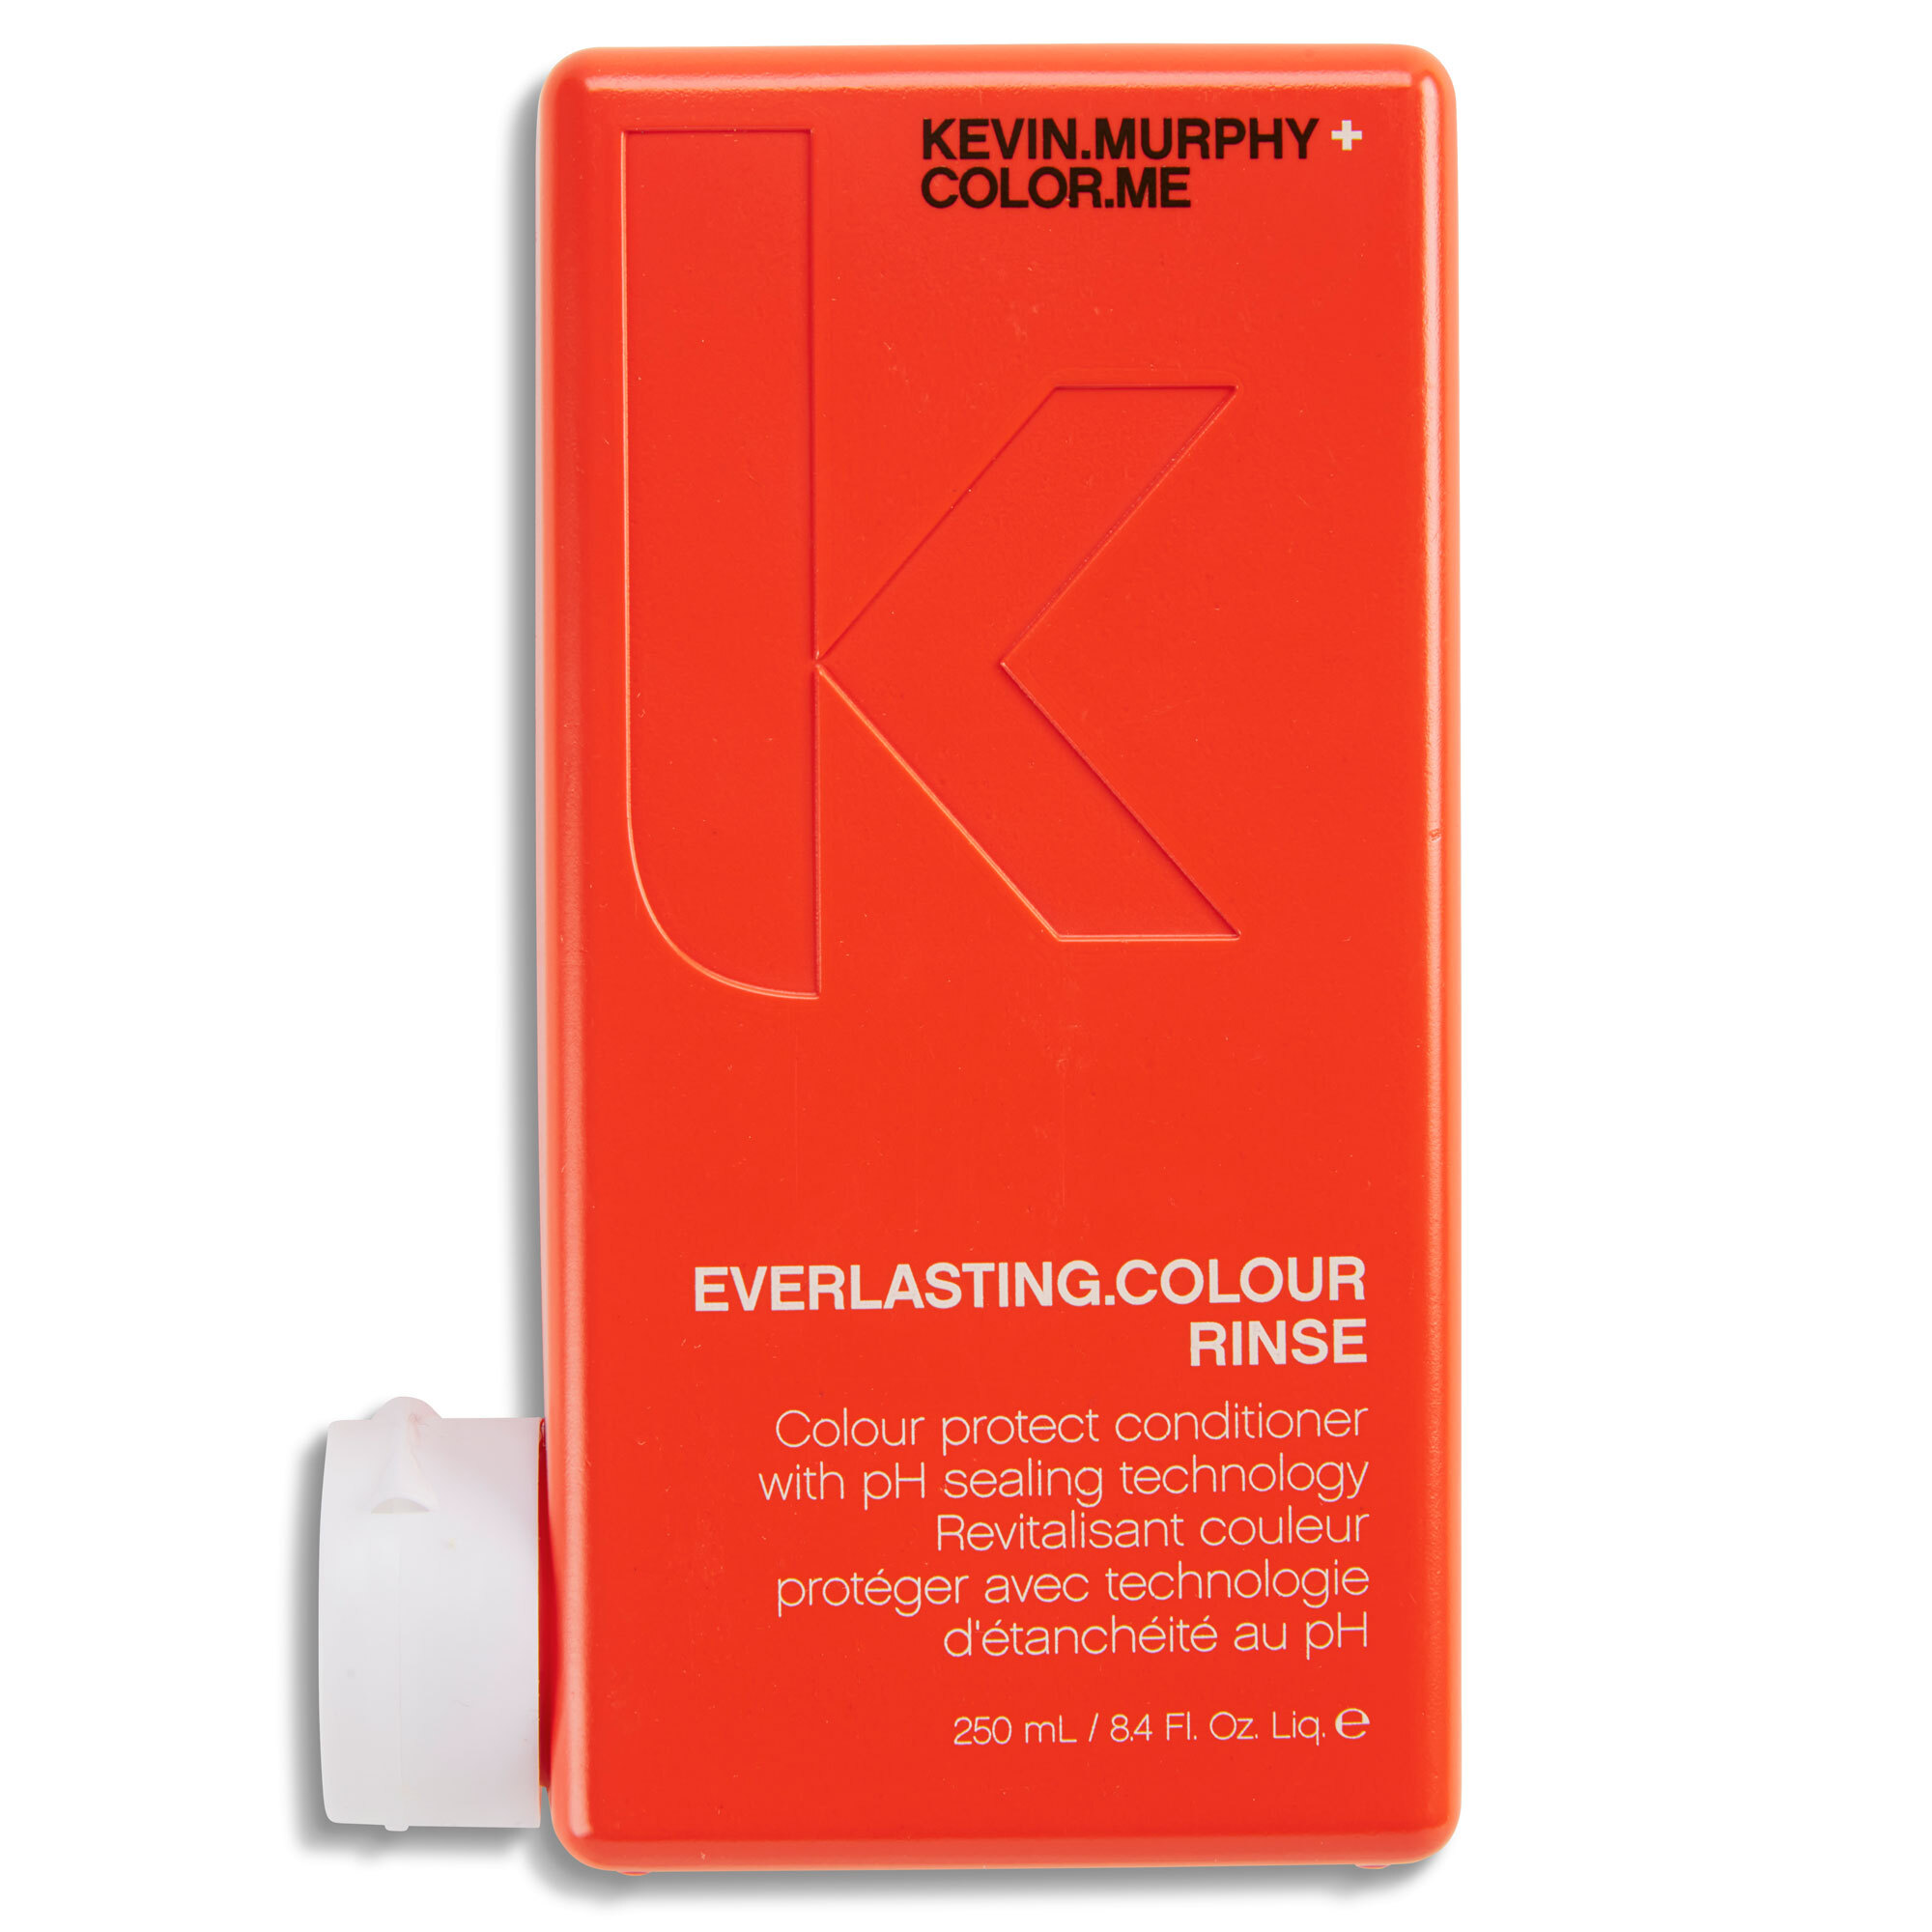 KEVIN.MURPHY EVERLASTING.COLOUR RINSE 8.4oz